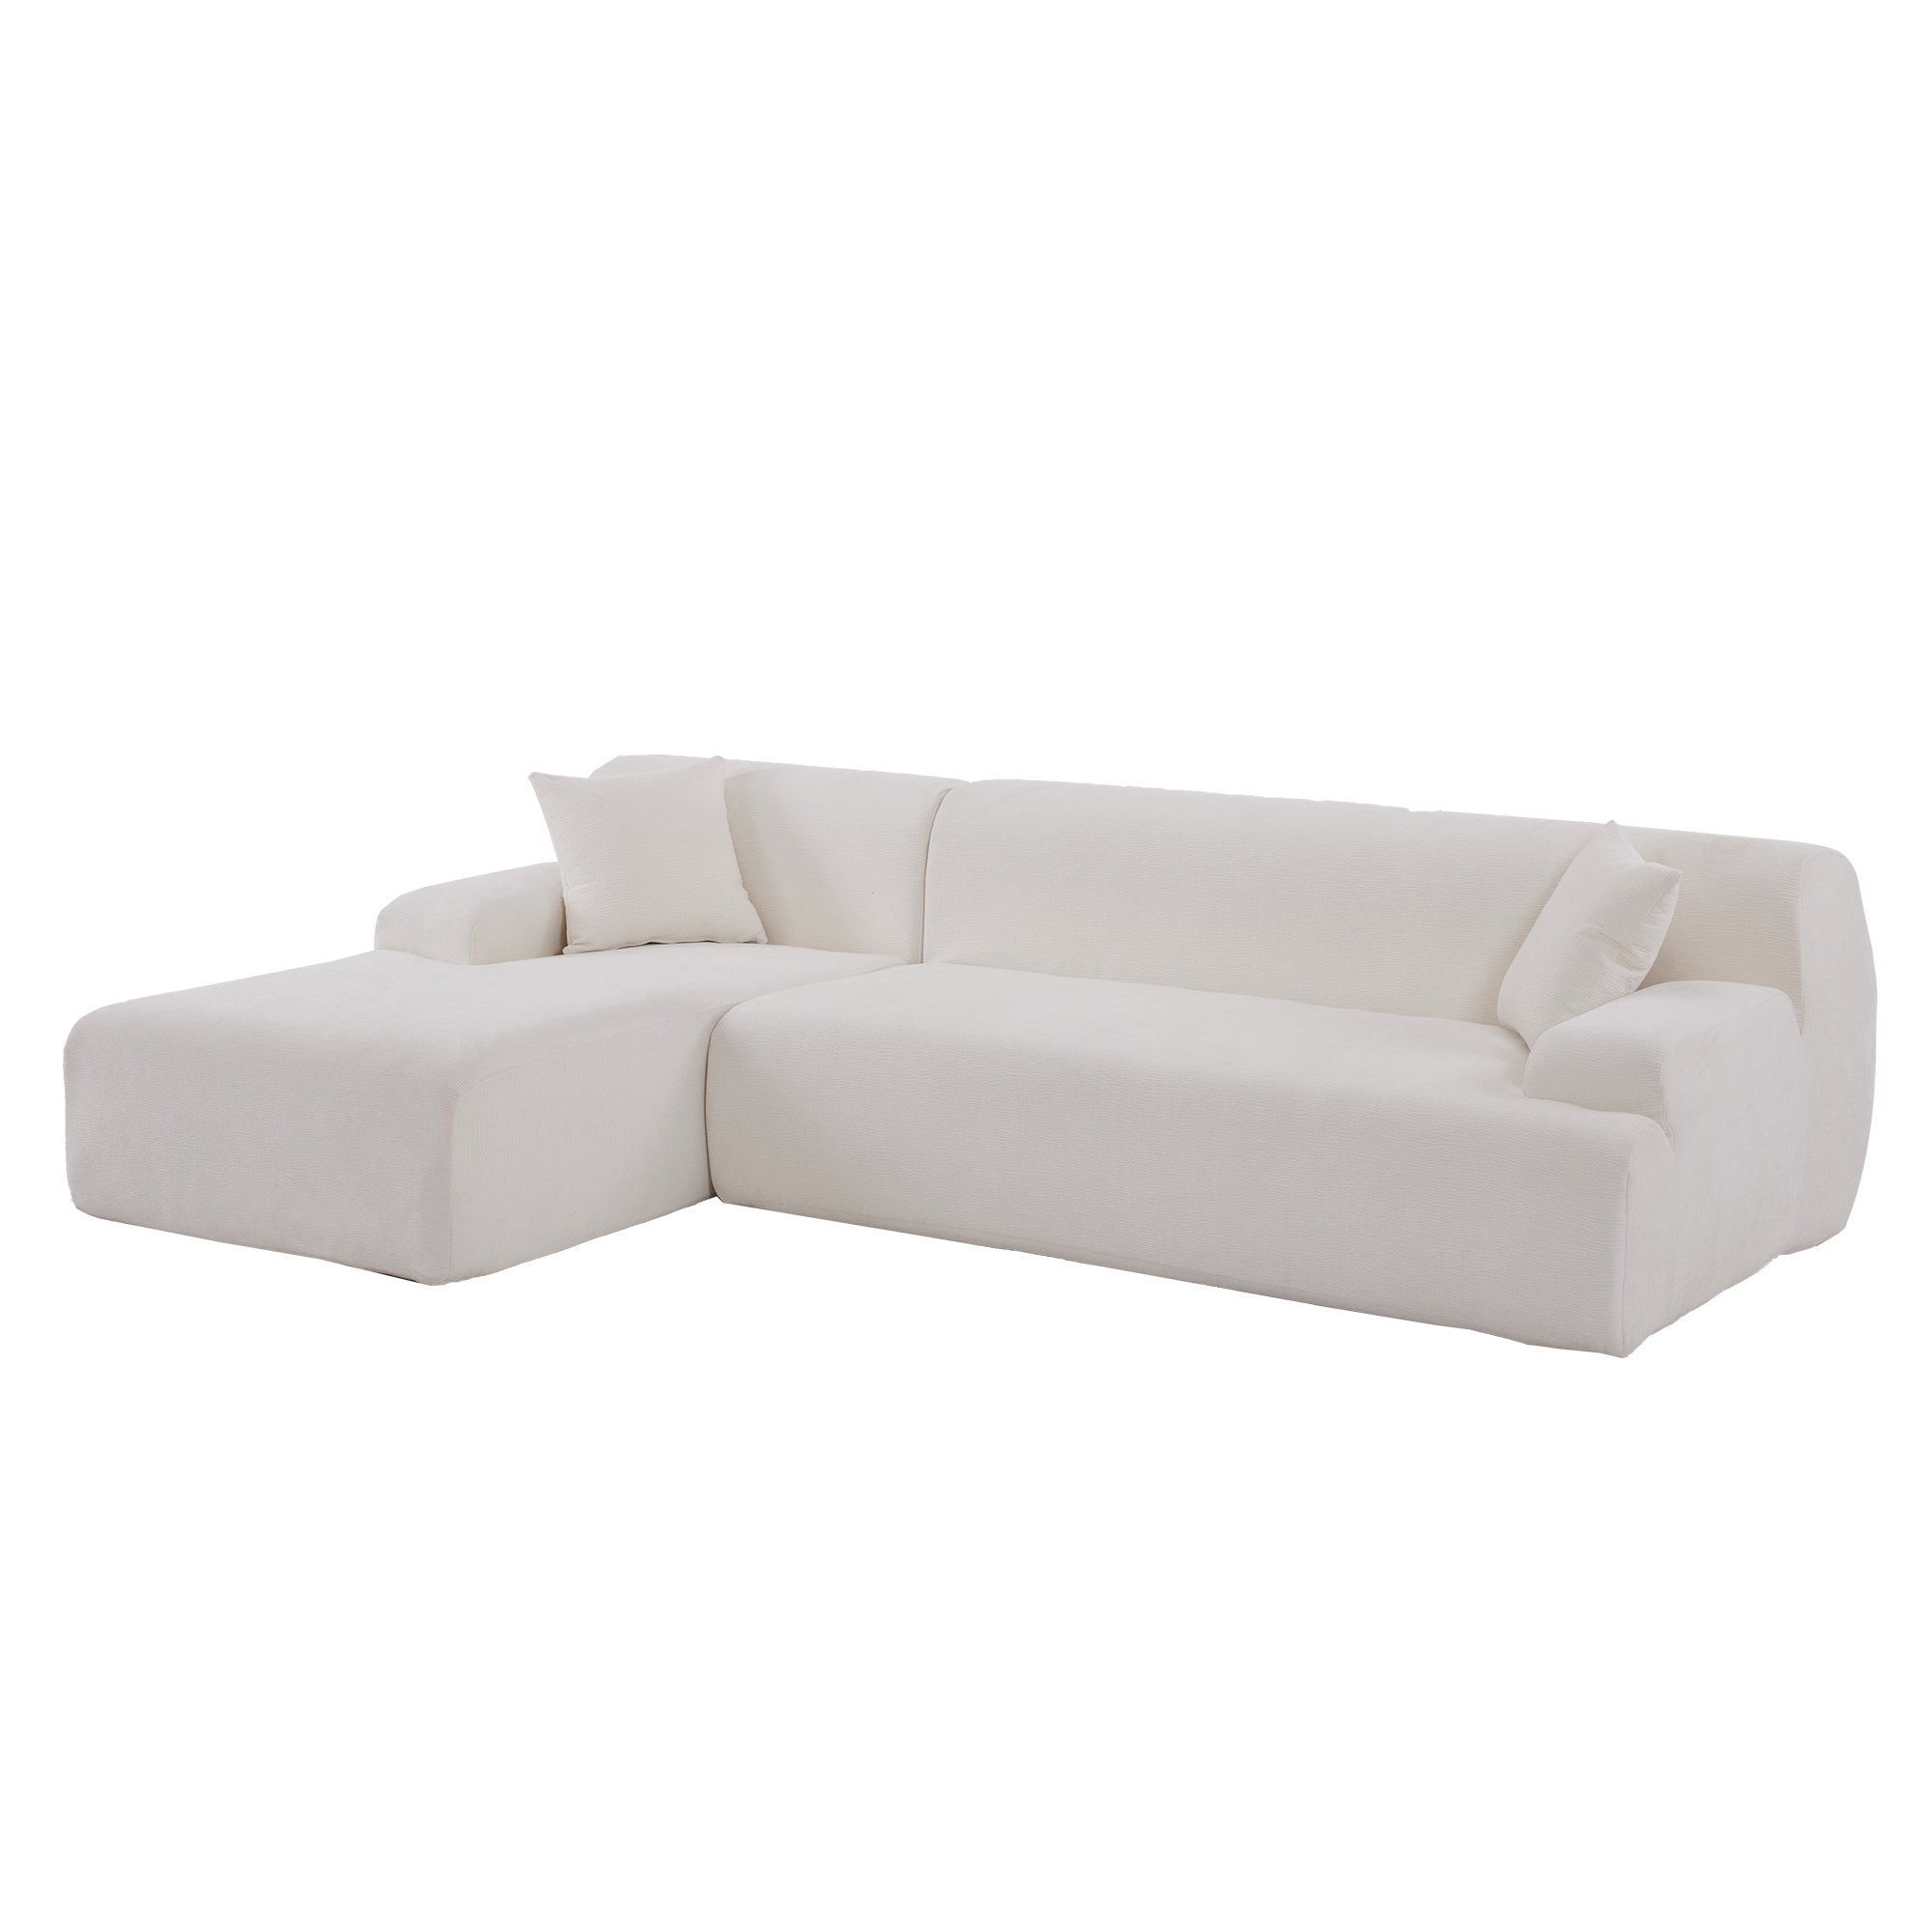 Modern Large L-Shape Modular Sectional Sofa 2  Piece Free Combination Simplified Style - Beige